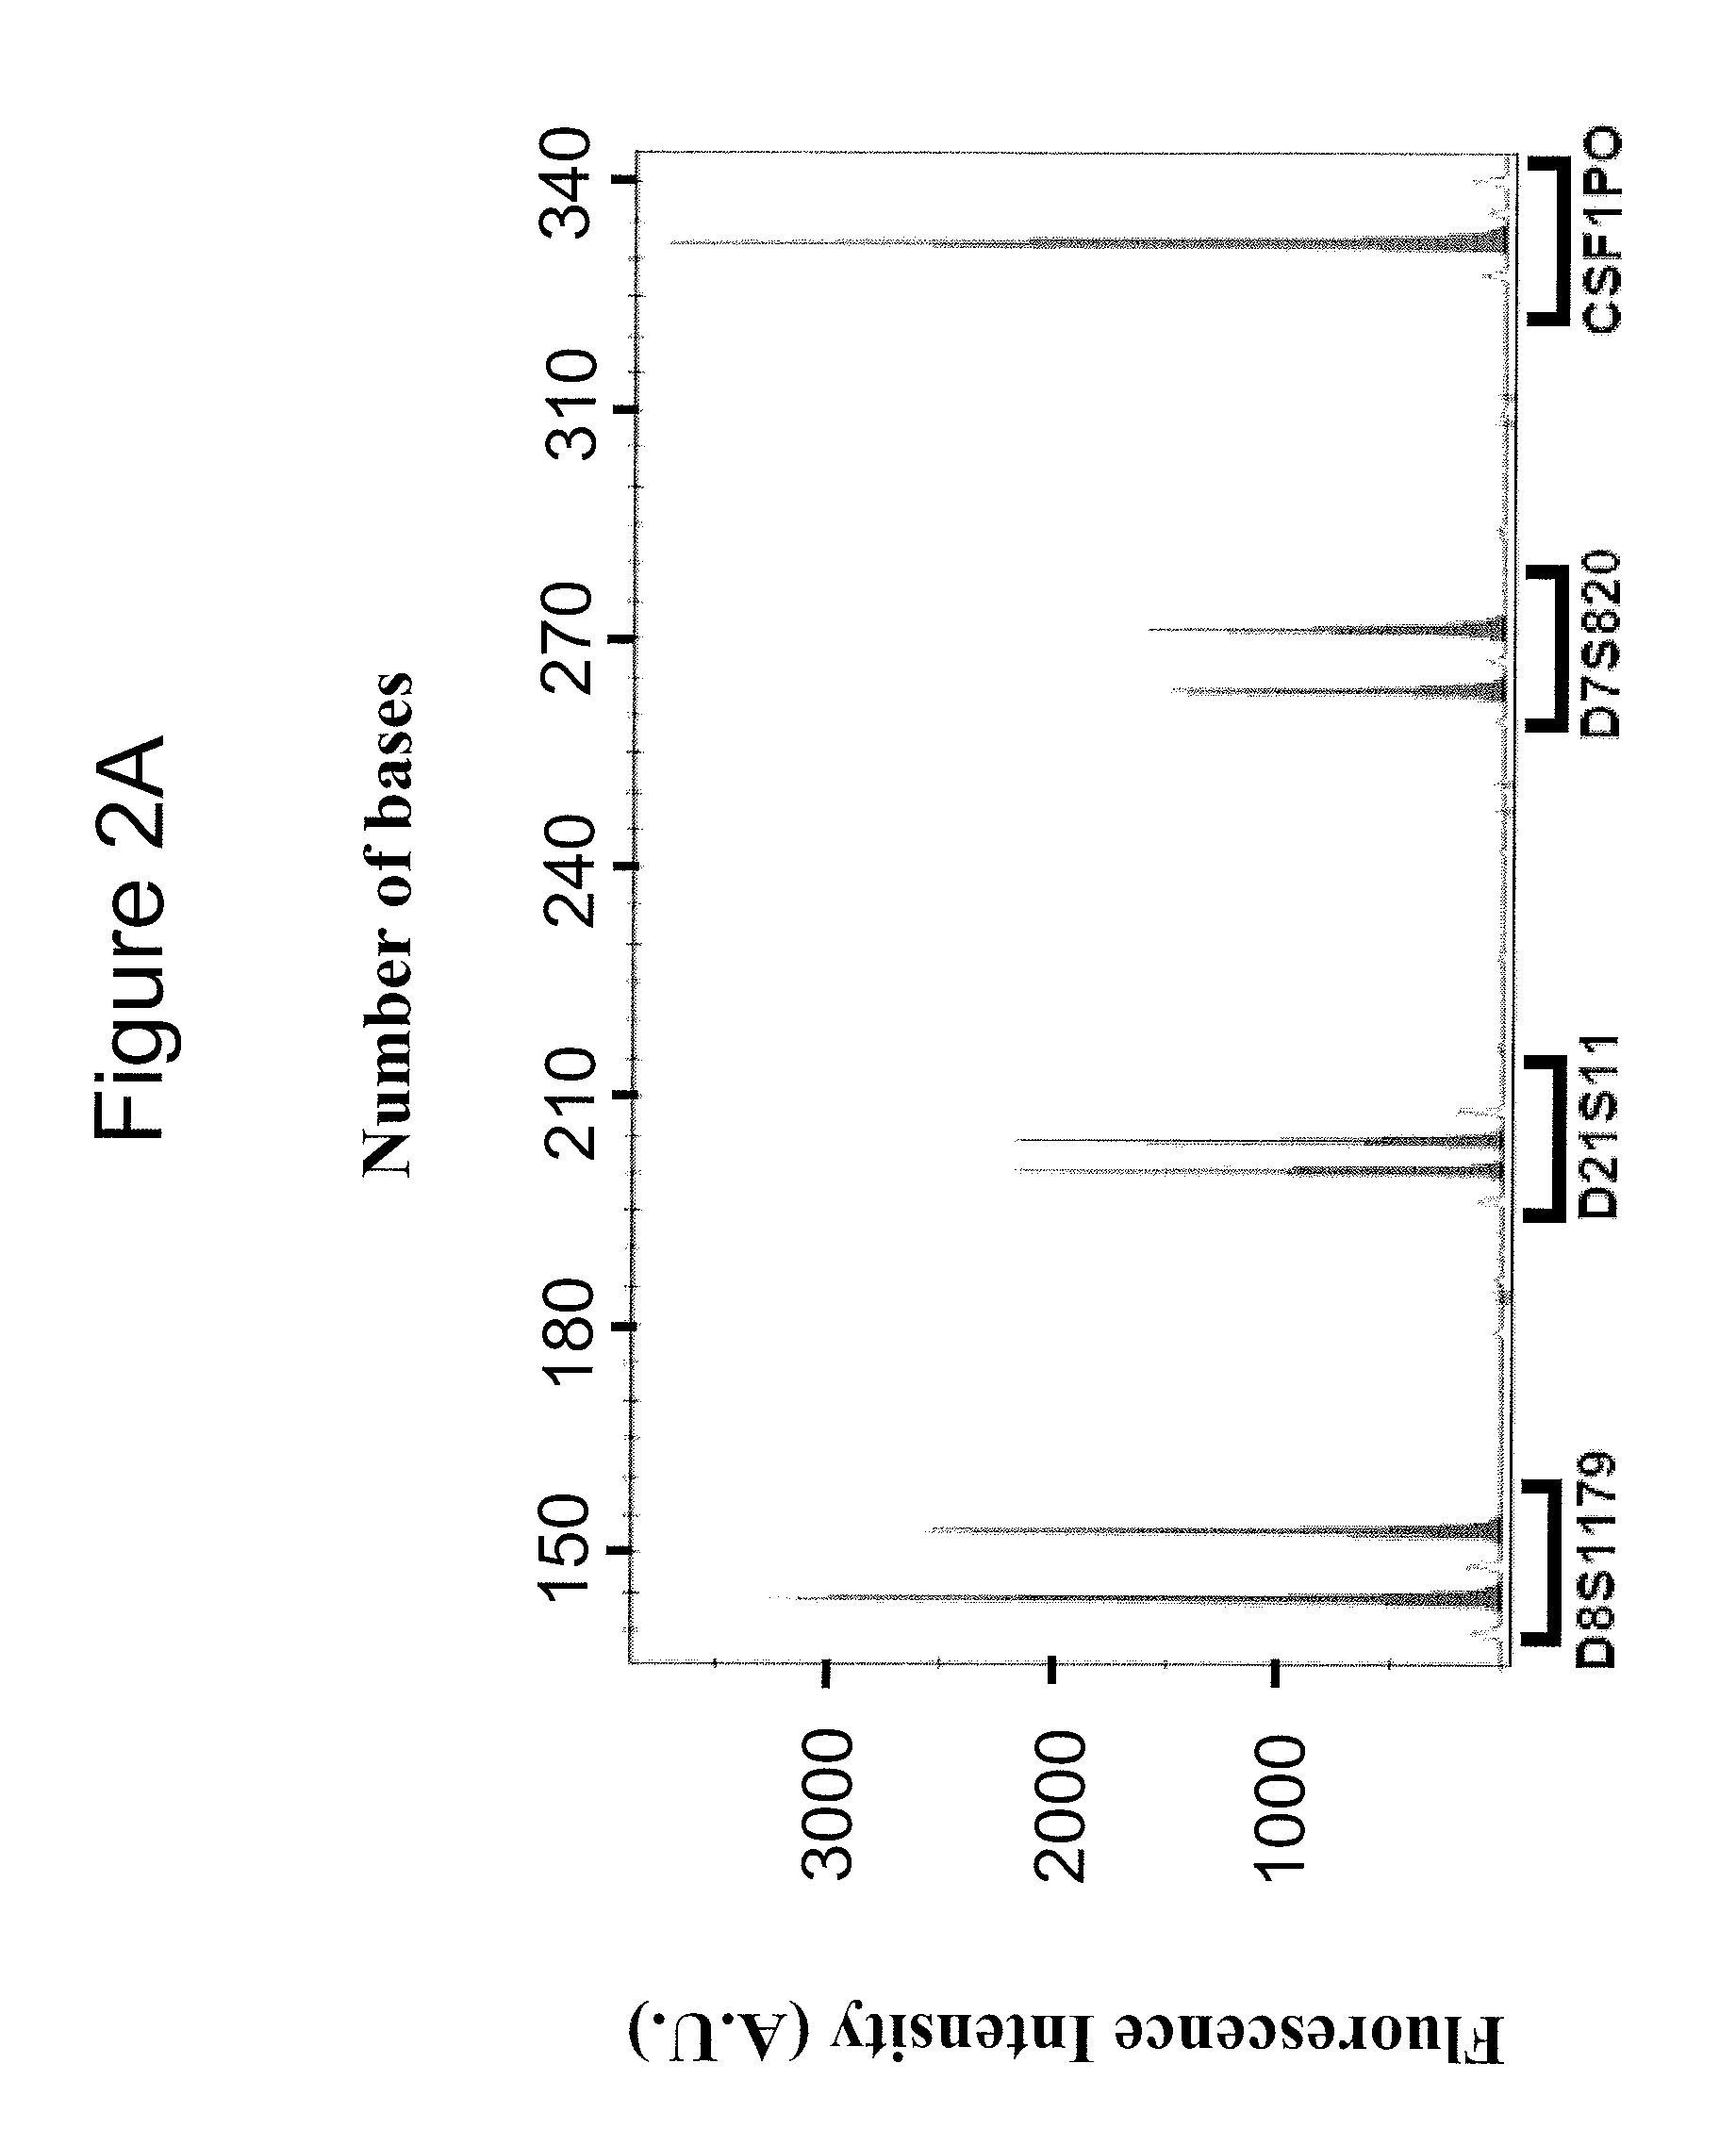 Method For Recovering Nucleic Acid From A Mixed Cell Suspension, Without Centrifugation